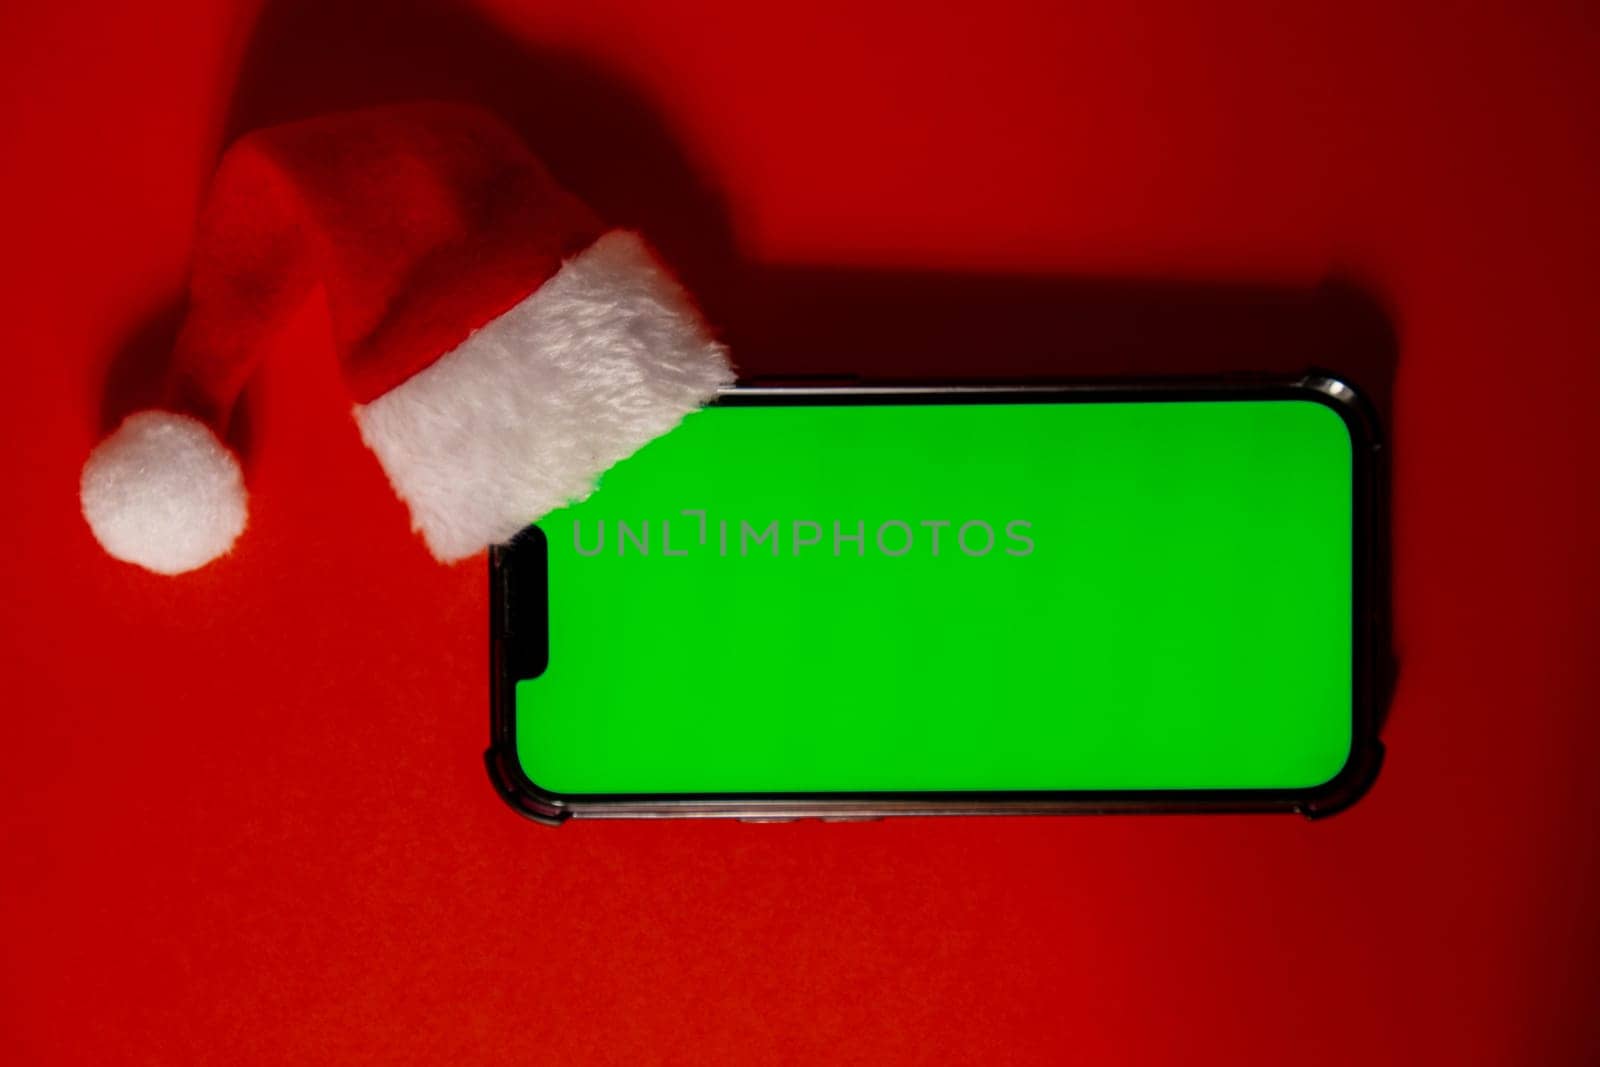 Mobile phone dressed in Santa-Claus red-white hat with chroma key screen against red background. Concept for Christmas or New Years holidays. Blank cell phone. Digital gadget, technology copy space wireless wishlist concept. Social media advertisement